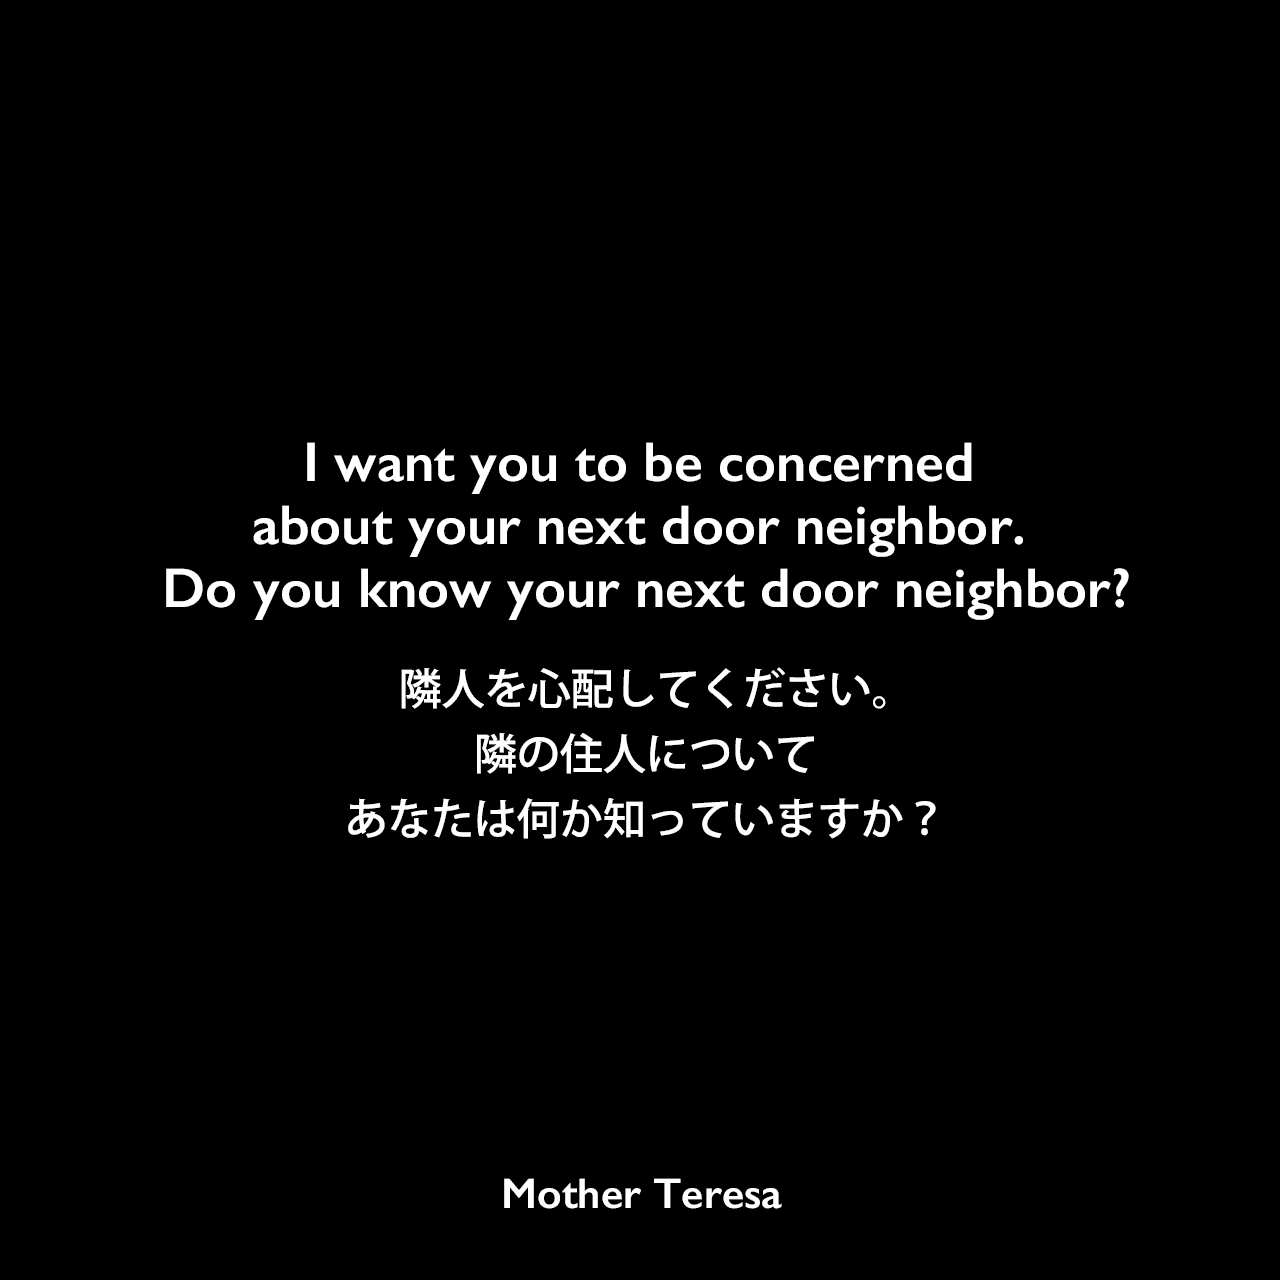 I want you to be concerned about your next door neighbor. Do you know your next door neighbor?隣人を心配してください。隣の住人についてあなたは何か知っていますか？Mother Teresa